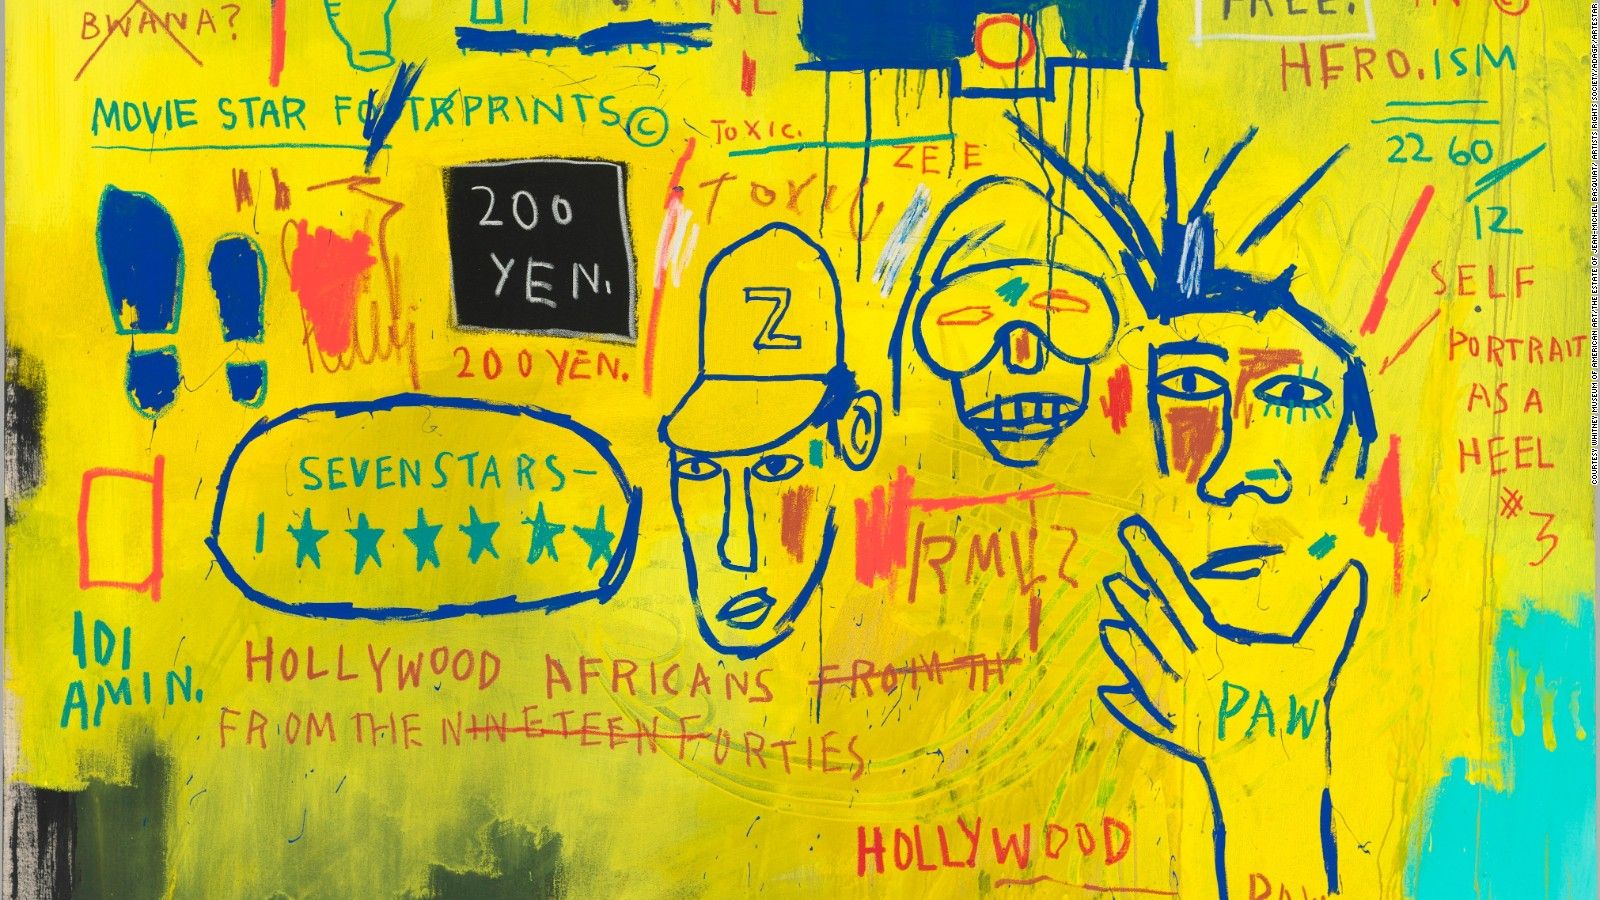 Boom for Real': The Barbican celebrates Basquiat